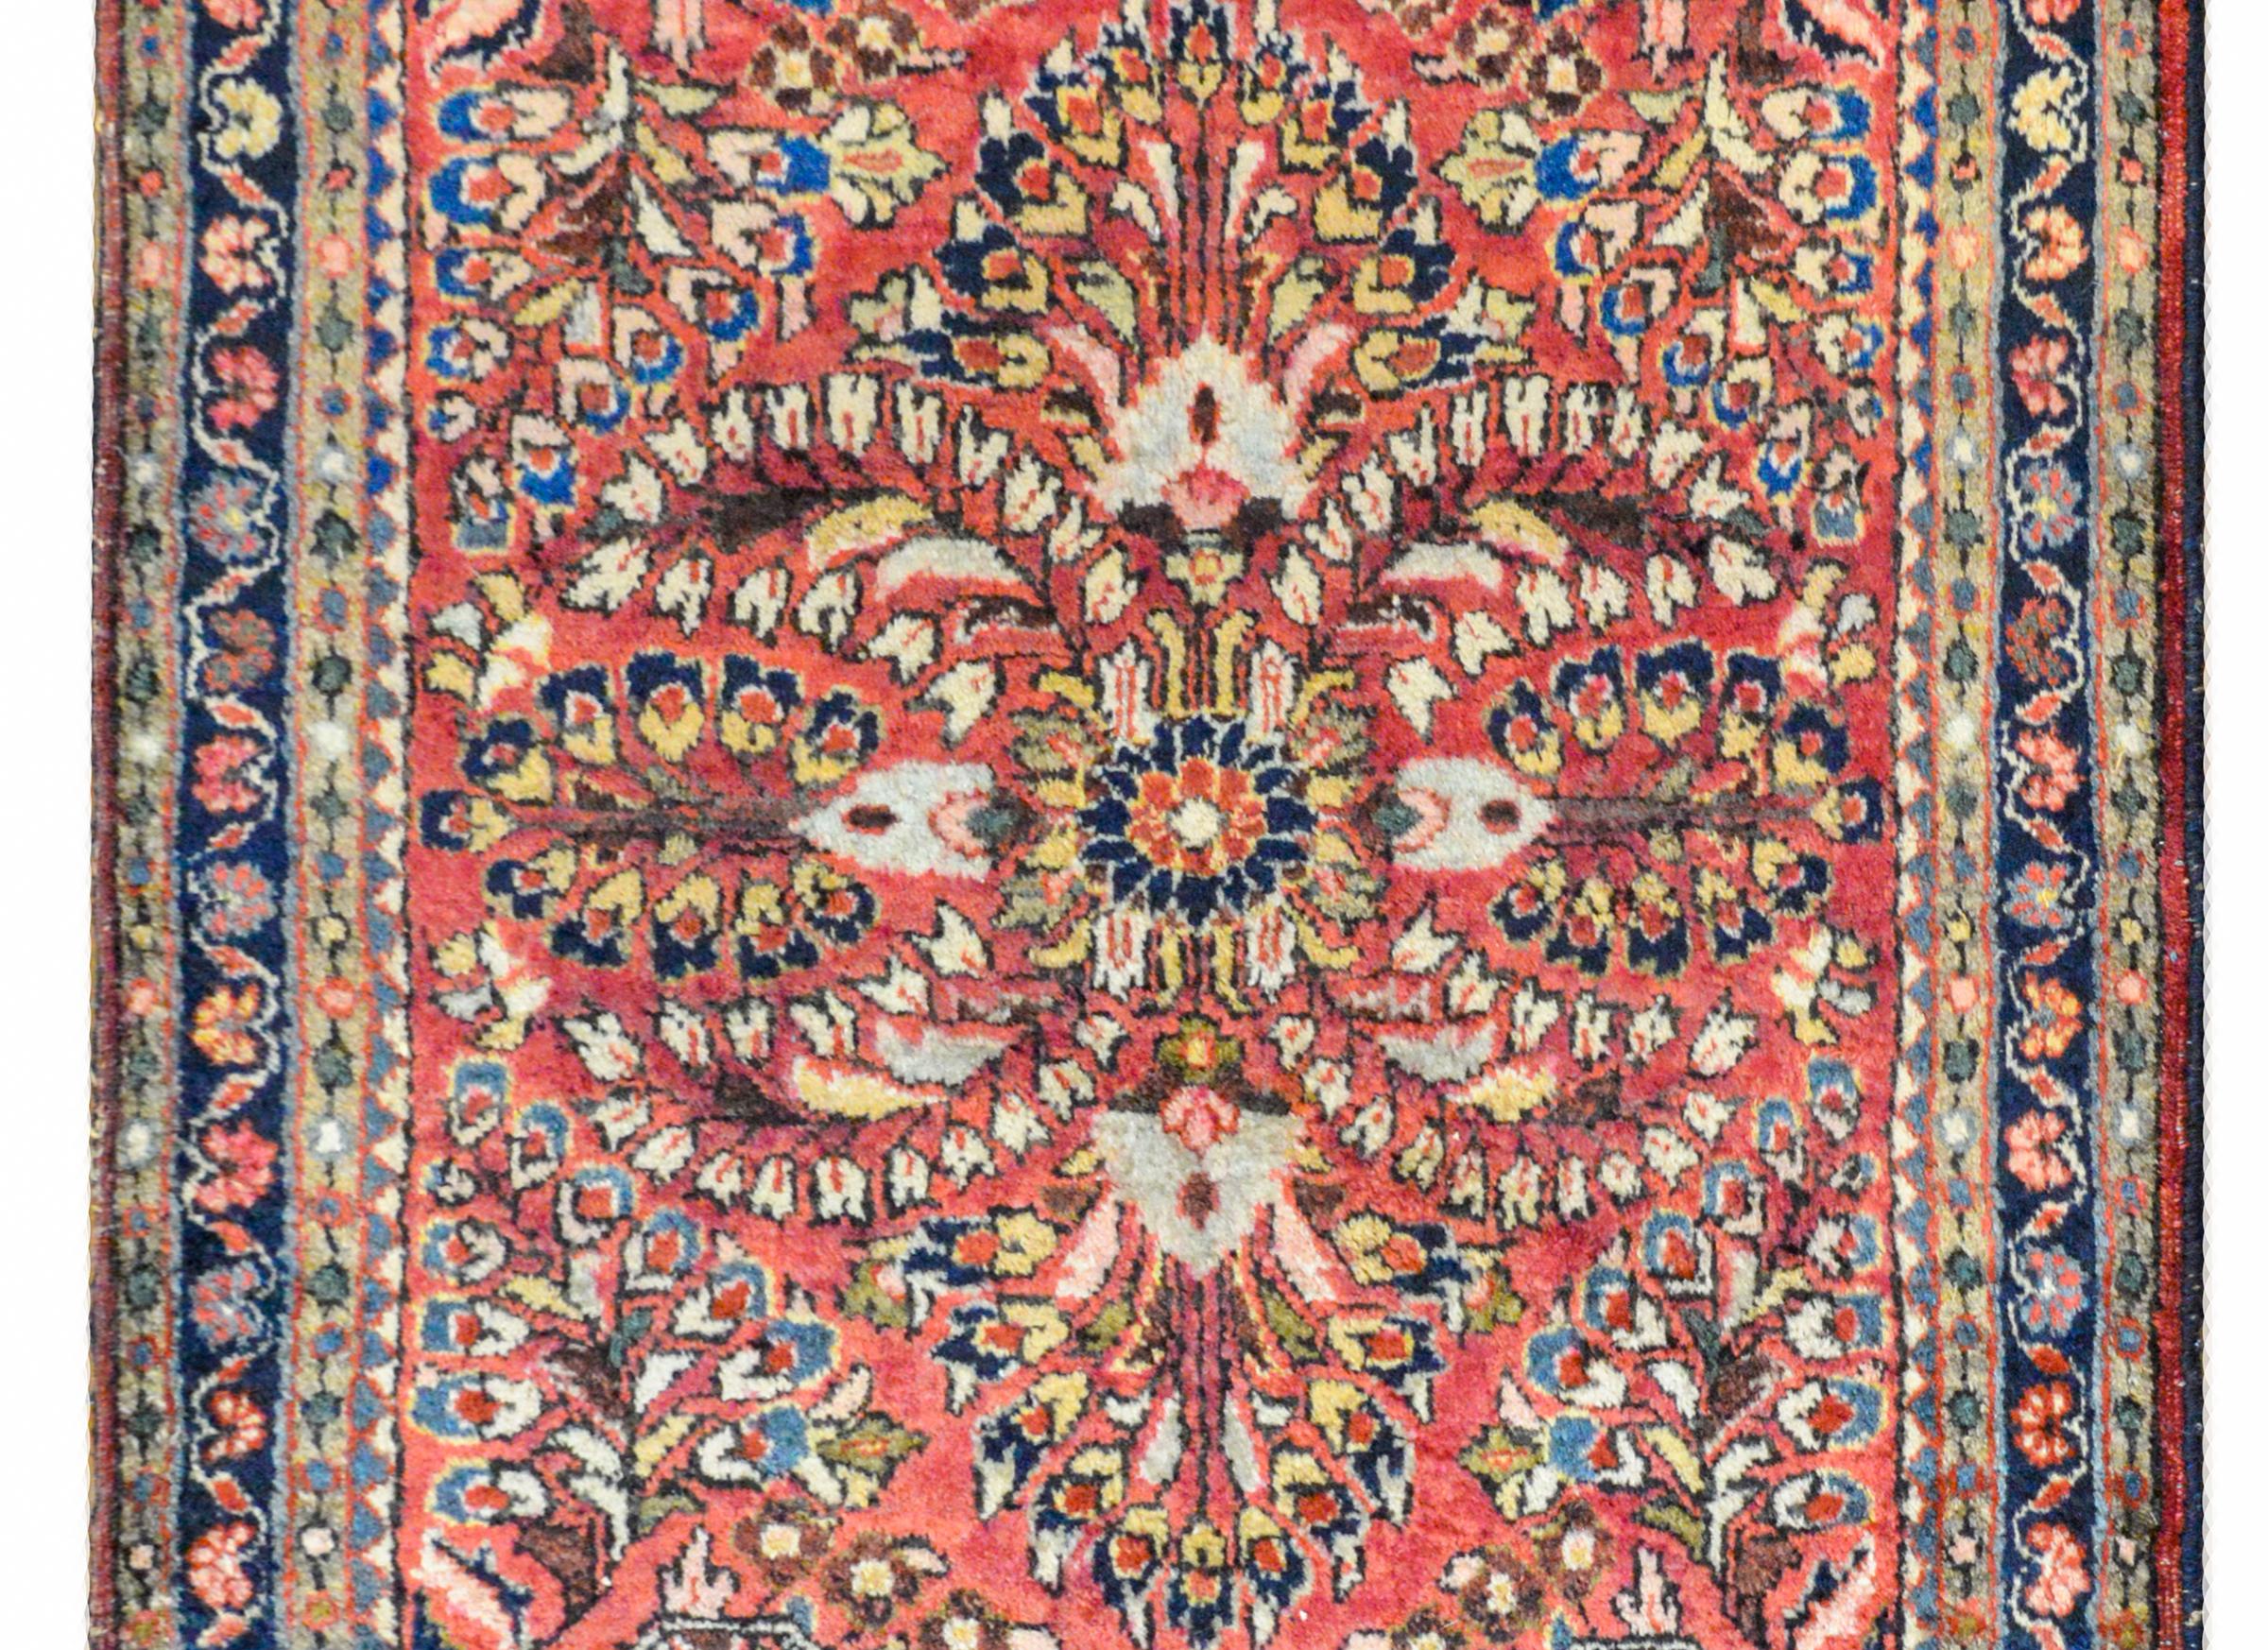 A wonderful early 20th century petite Persian Sarouk rug with a large-scale mirrored floral pattern woven in light and dark indigo, cream, pink, and green wool, against a light cranberry colored ground. The border is sweet with a central petite